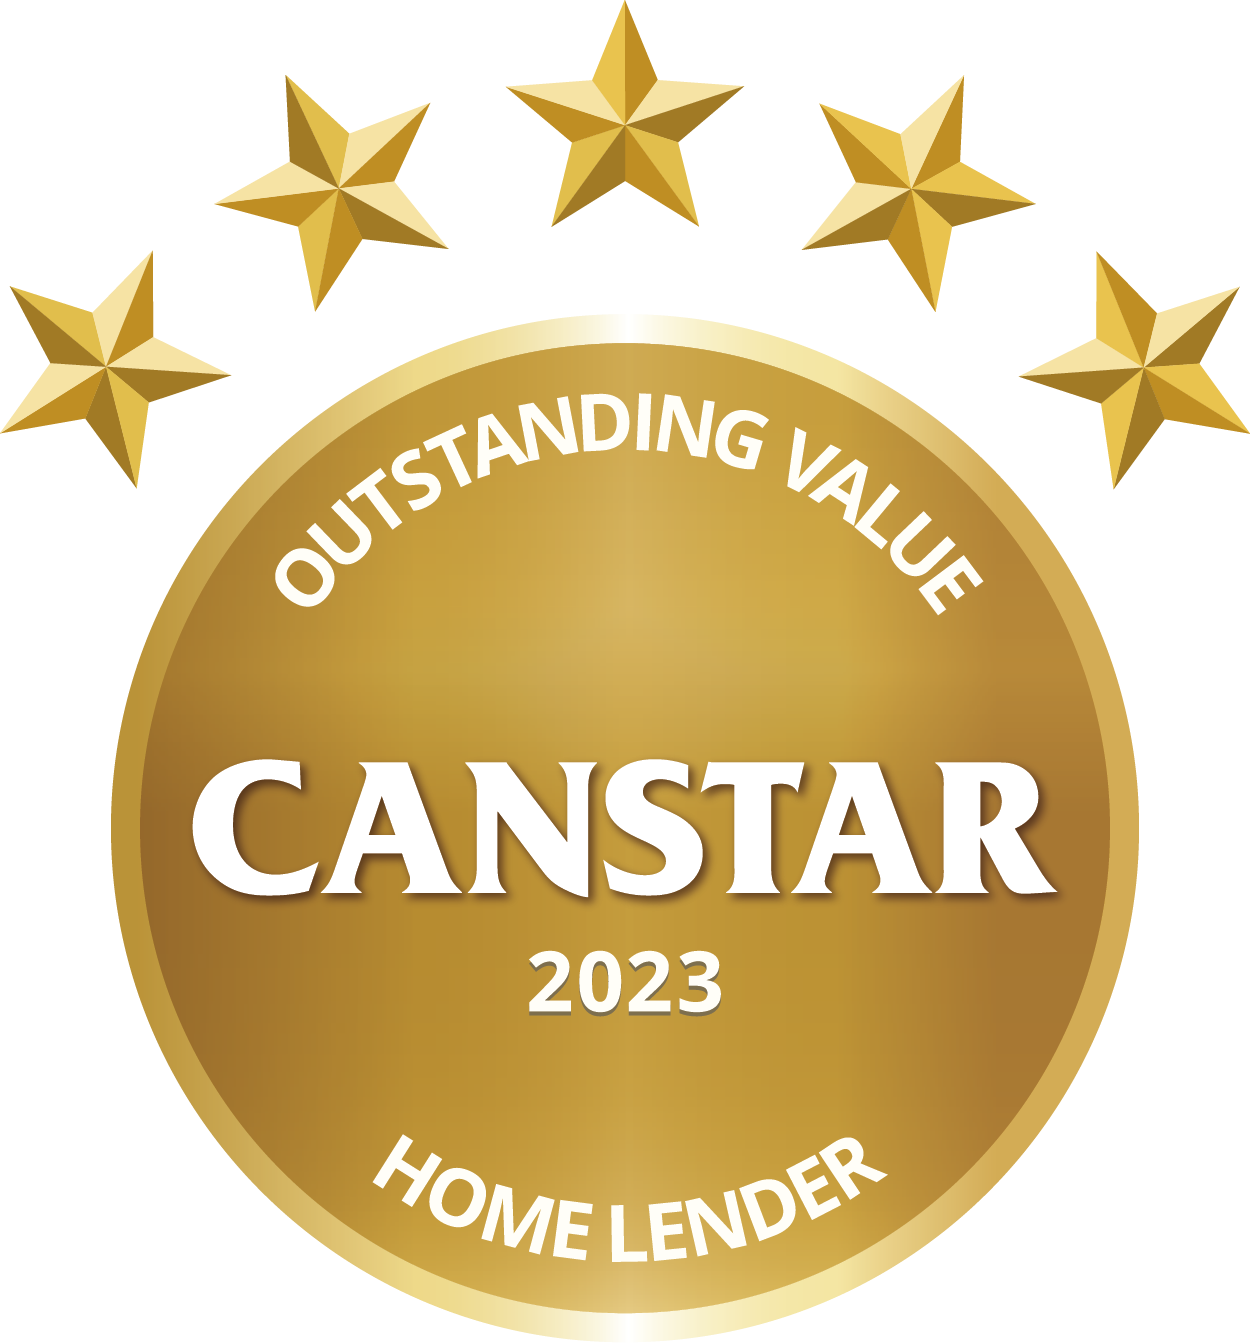 Canstar 2023 Outstading Value for Home Lender